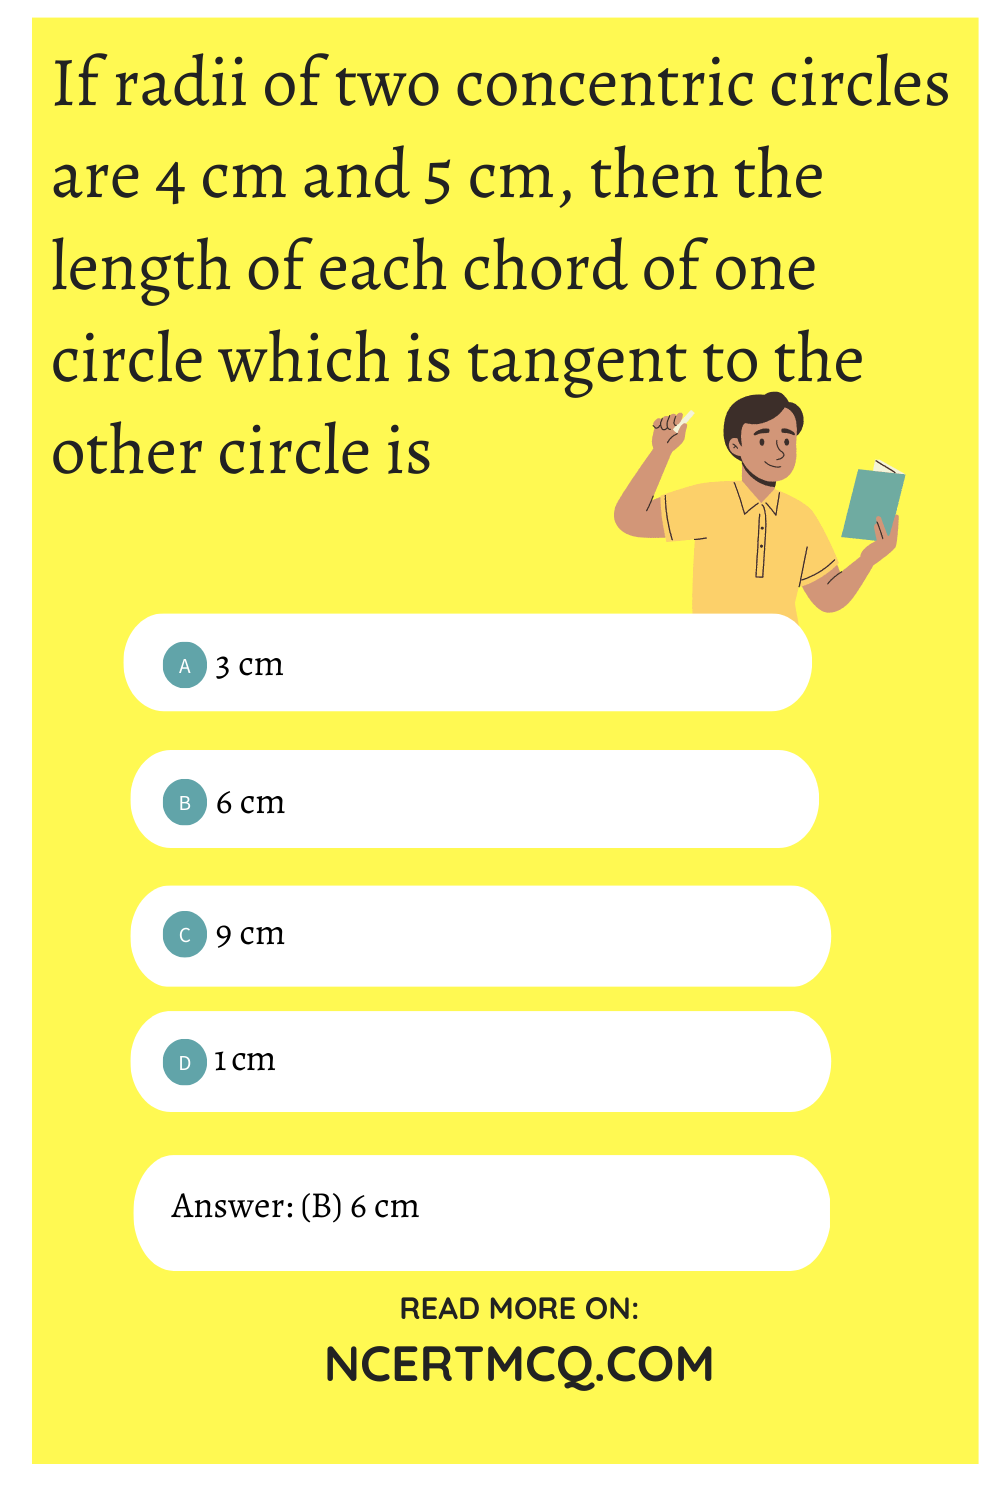 If radii of two concentric circles are 4 cm and 5 cm, then the length of each chord of one circle which is tangent to the other circle is